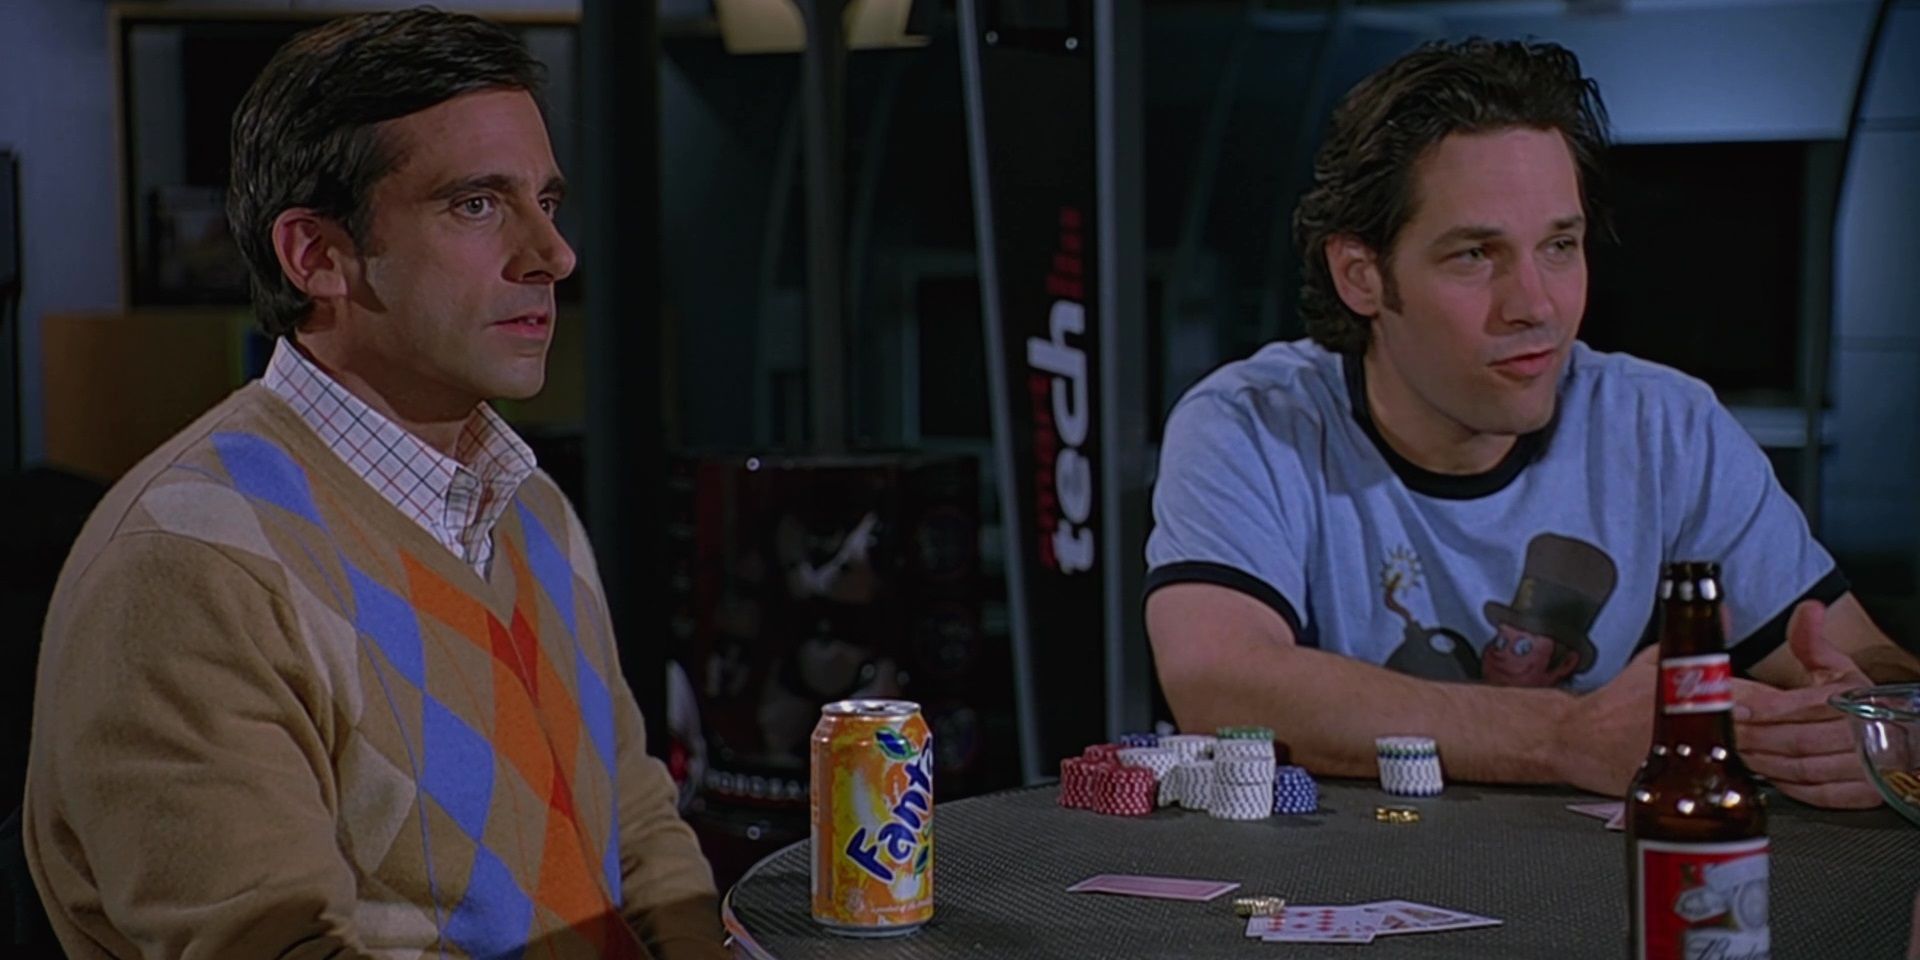 Steve Carell and Paul Rudd playing poker in The 40-Year-Old Virgin